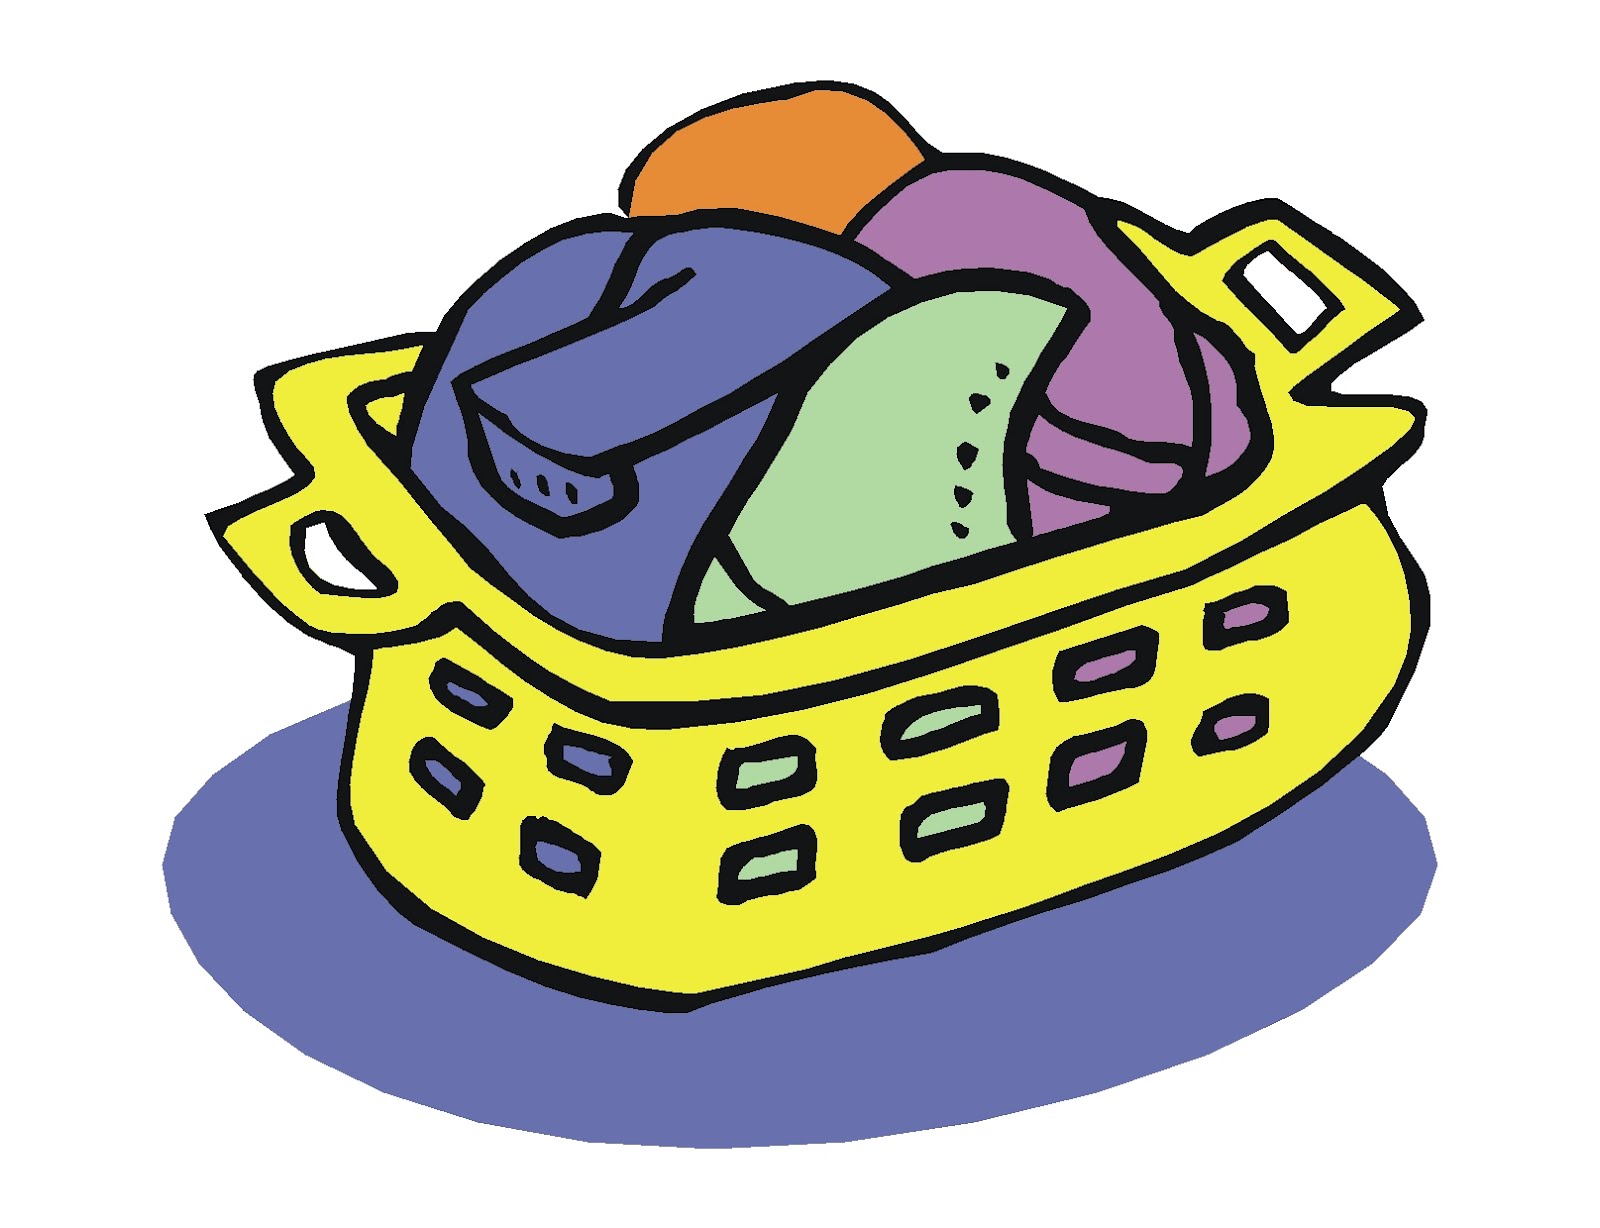 Clip Arts Related To : laundry clipart. 